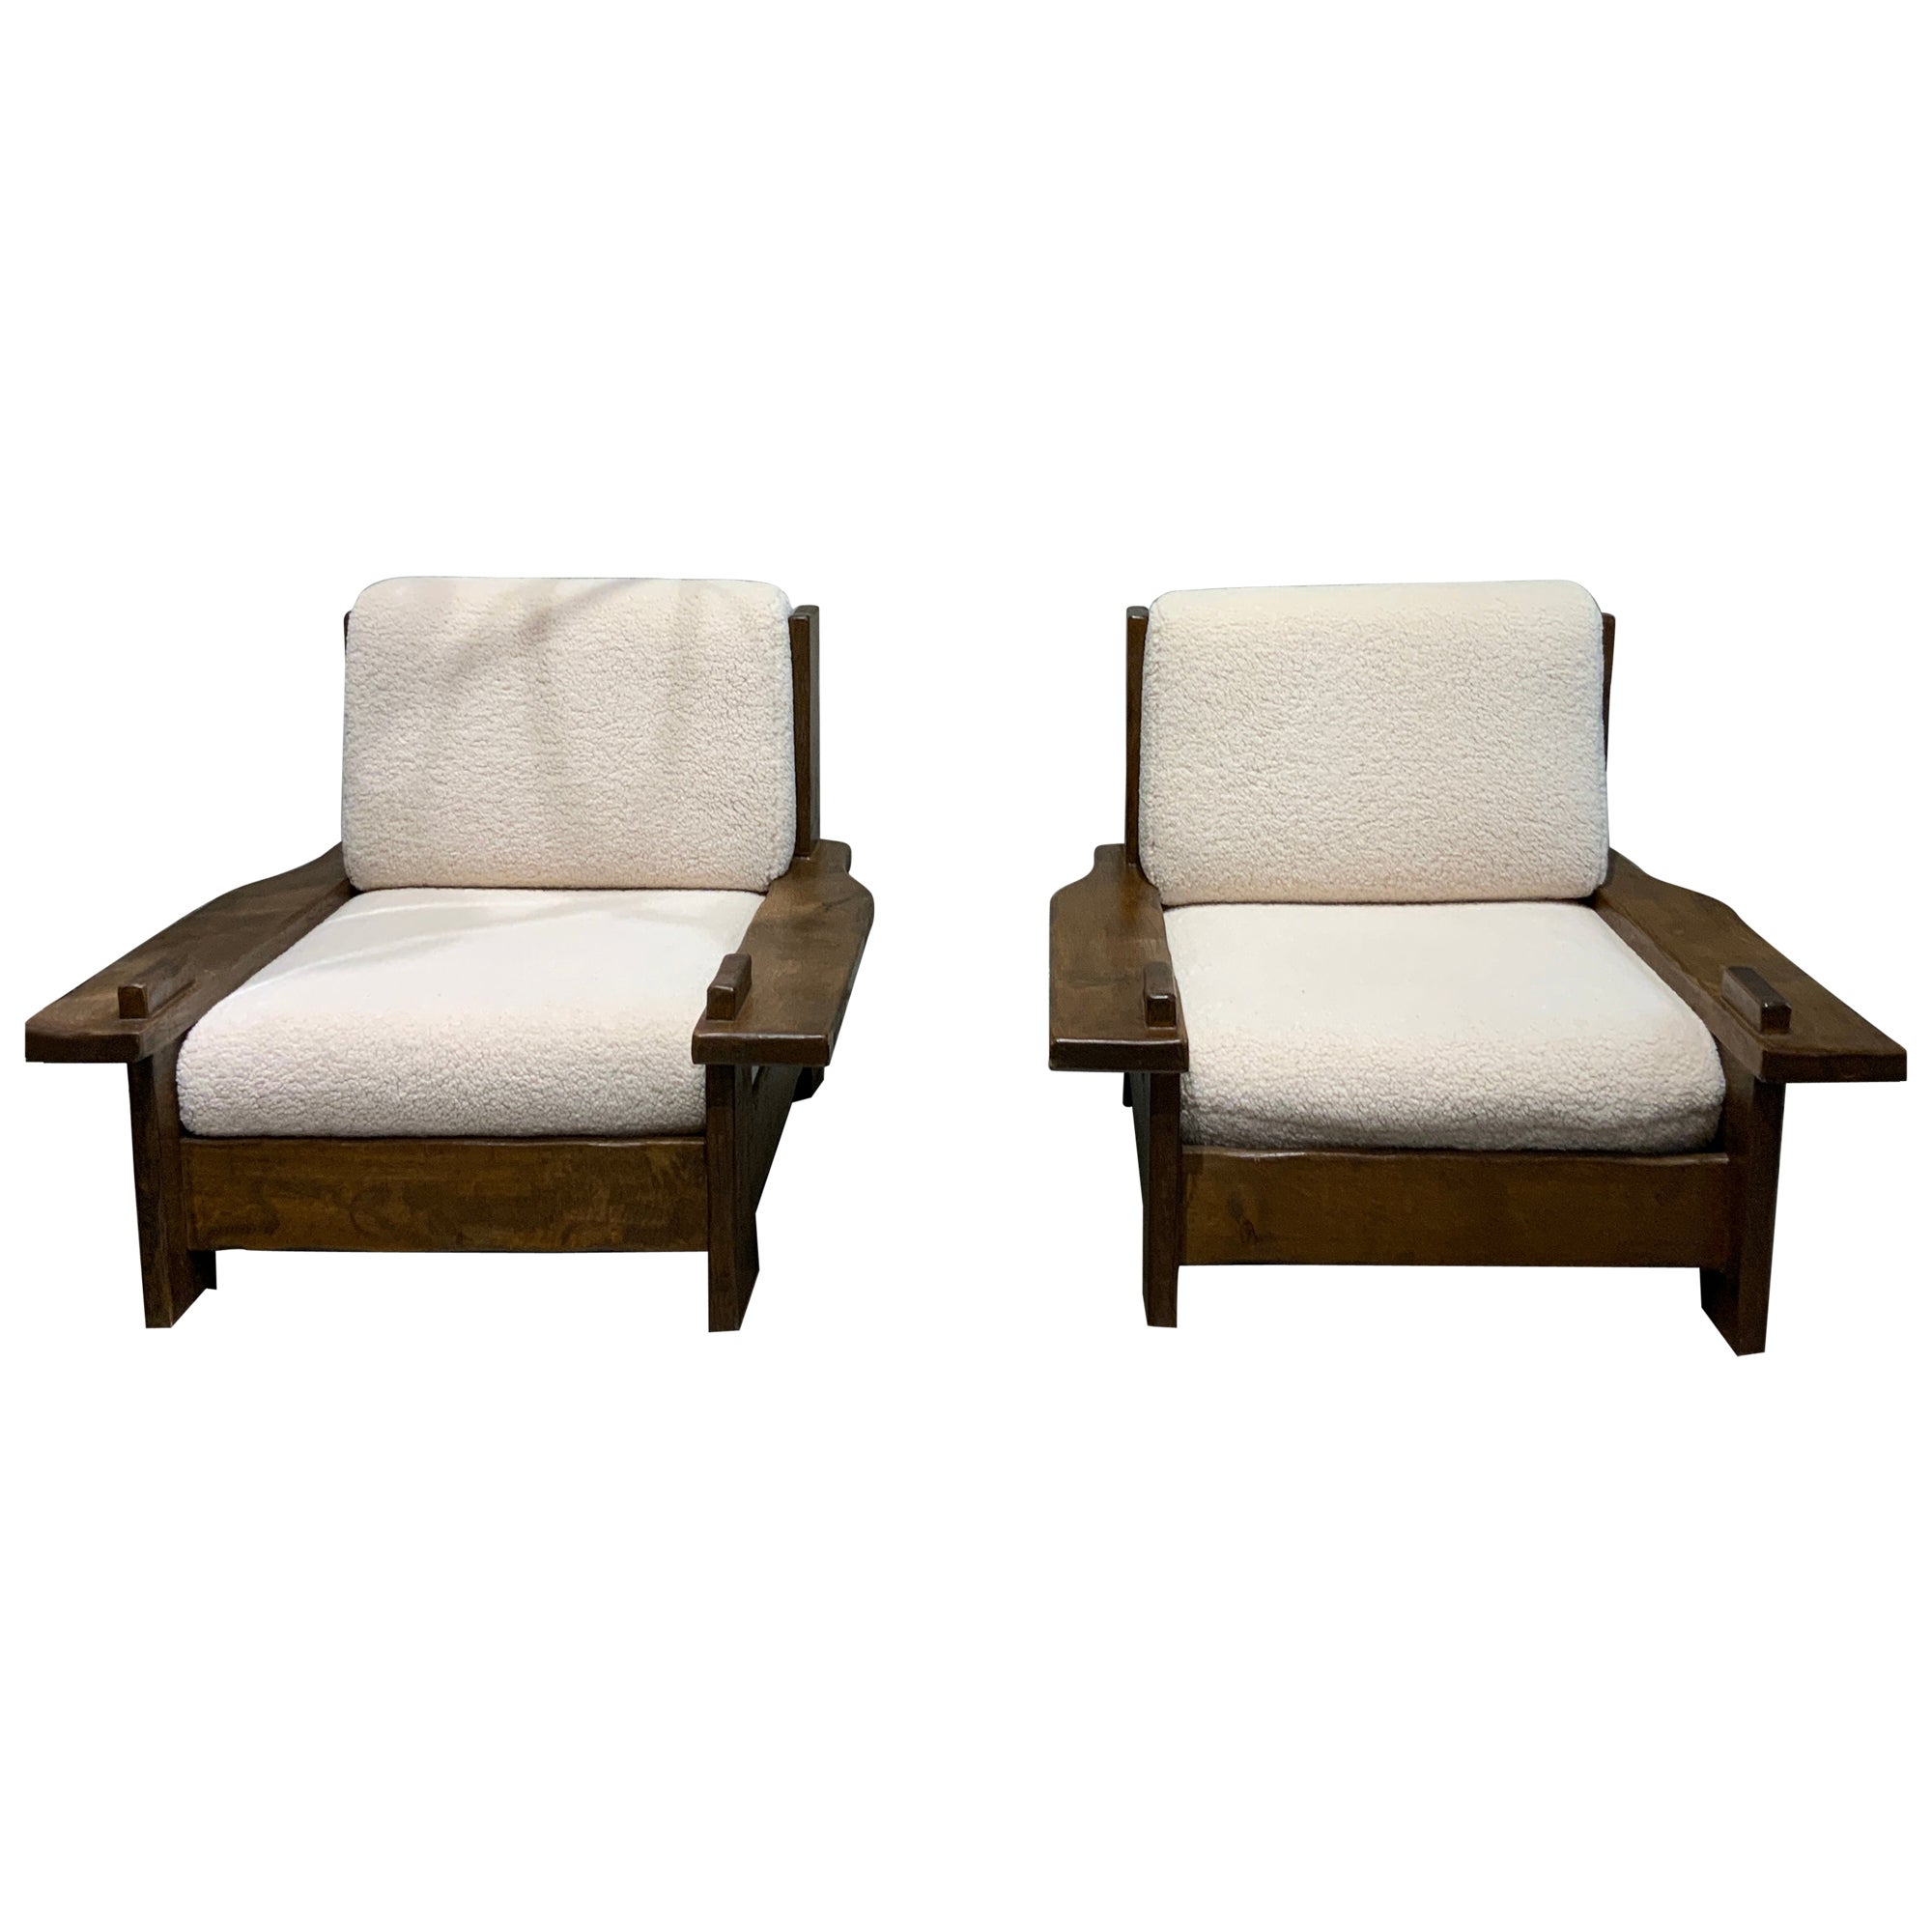 Impressive pair of brutalist lounge chairs France circa 1970 For Sale